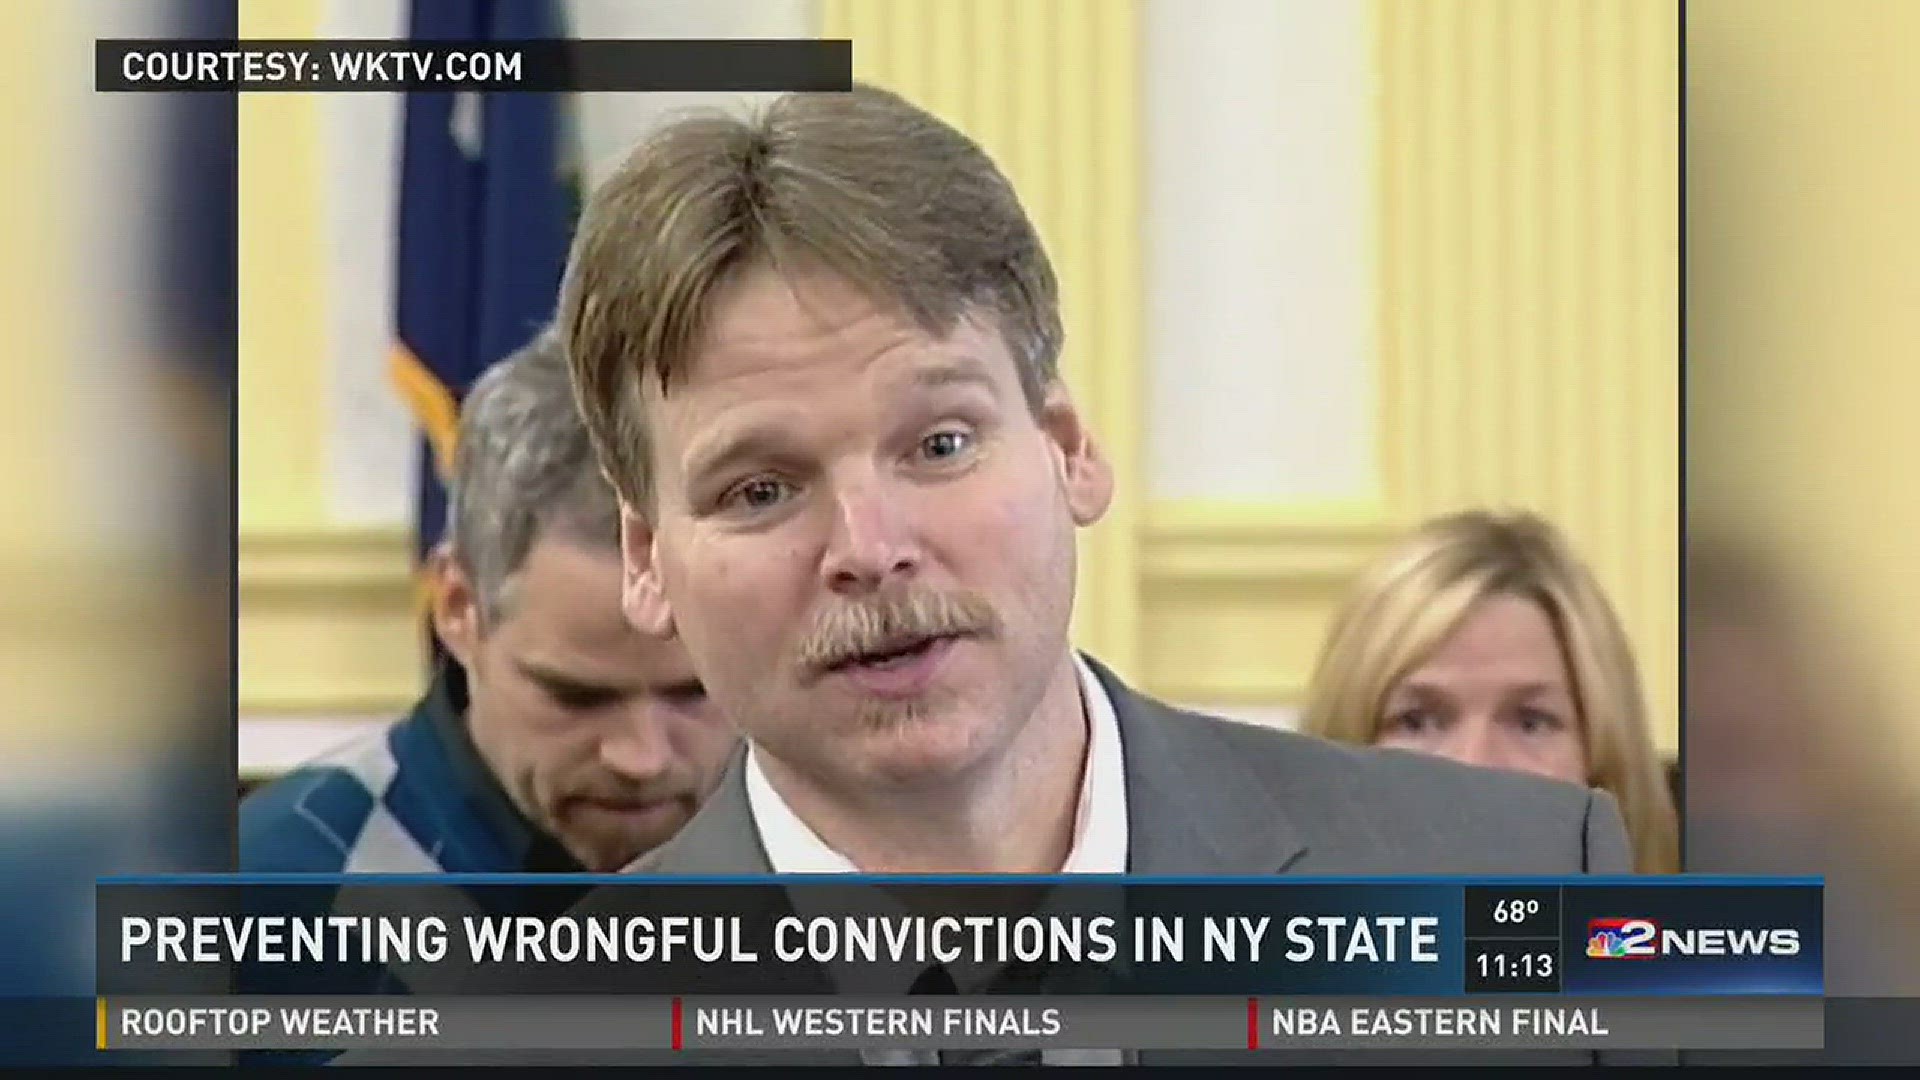 Preventing Wrongful Convictions in New York State